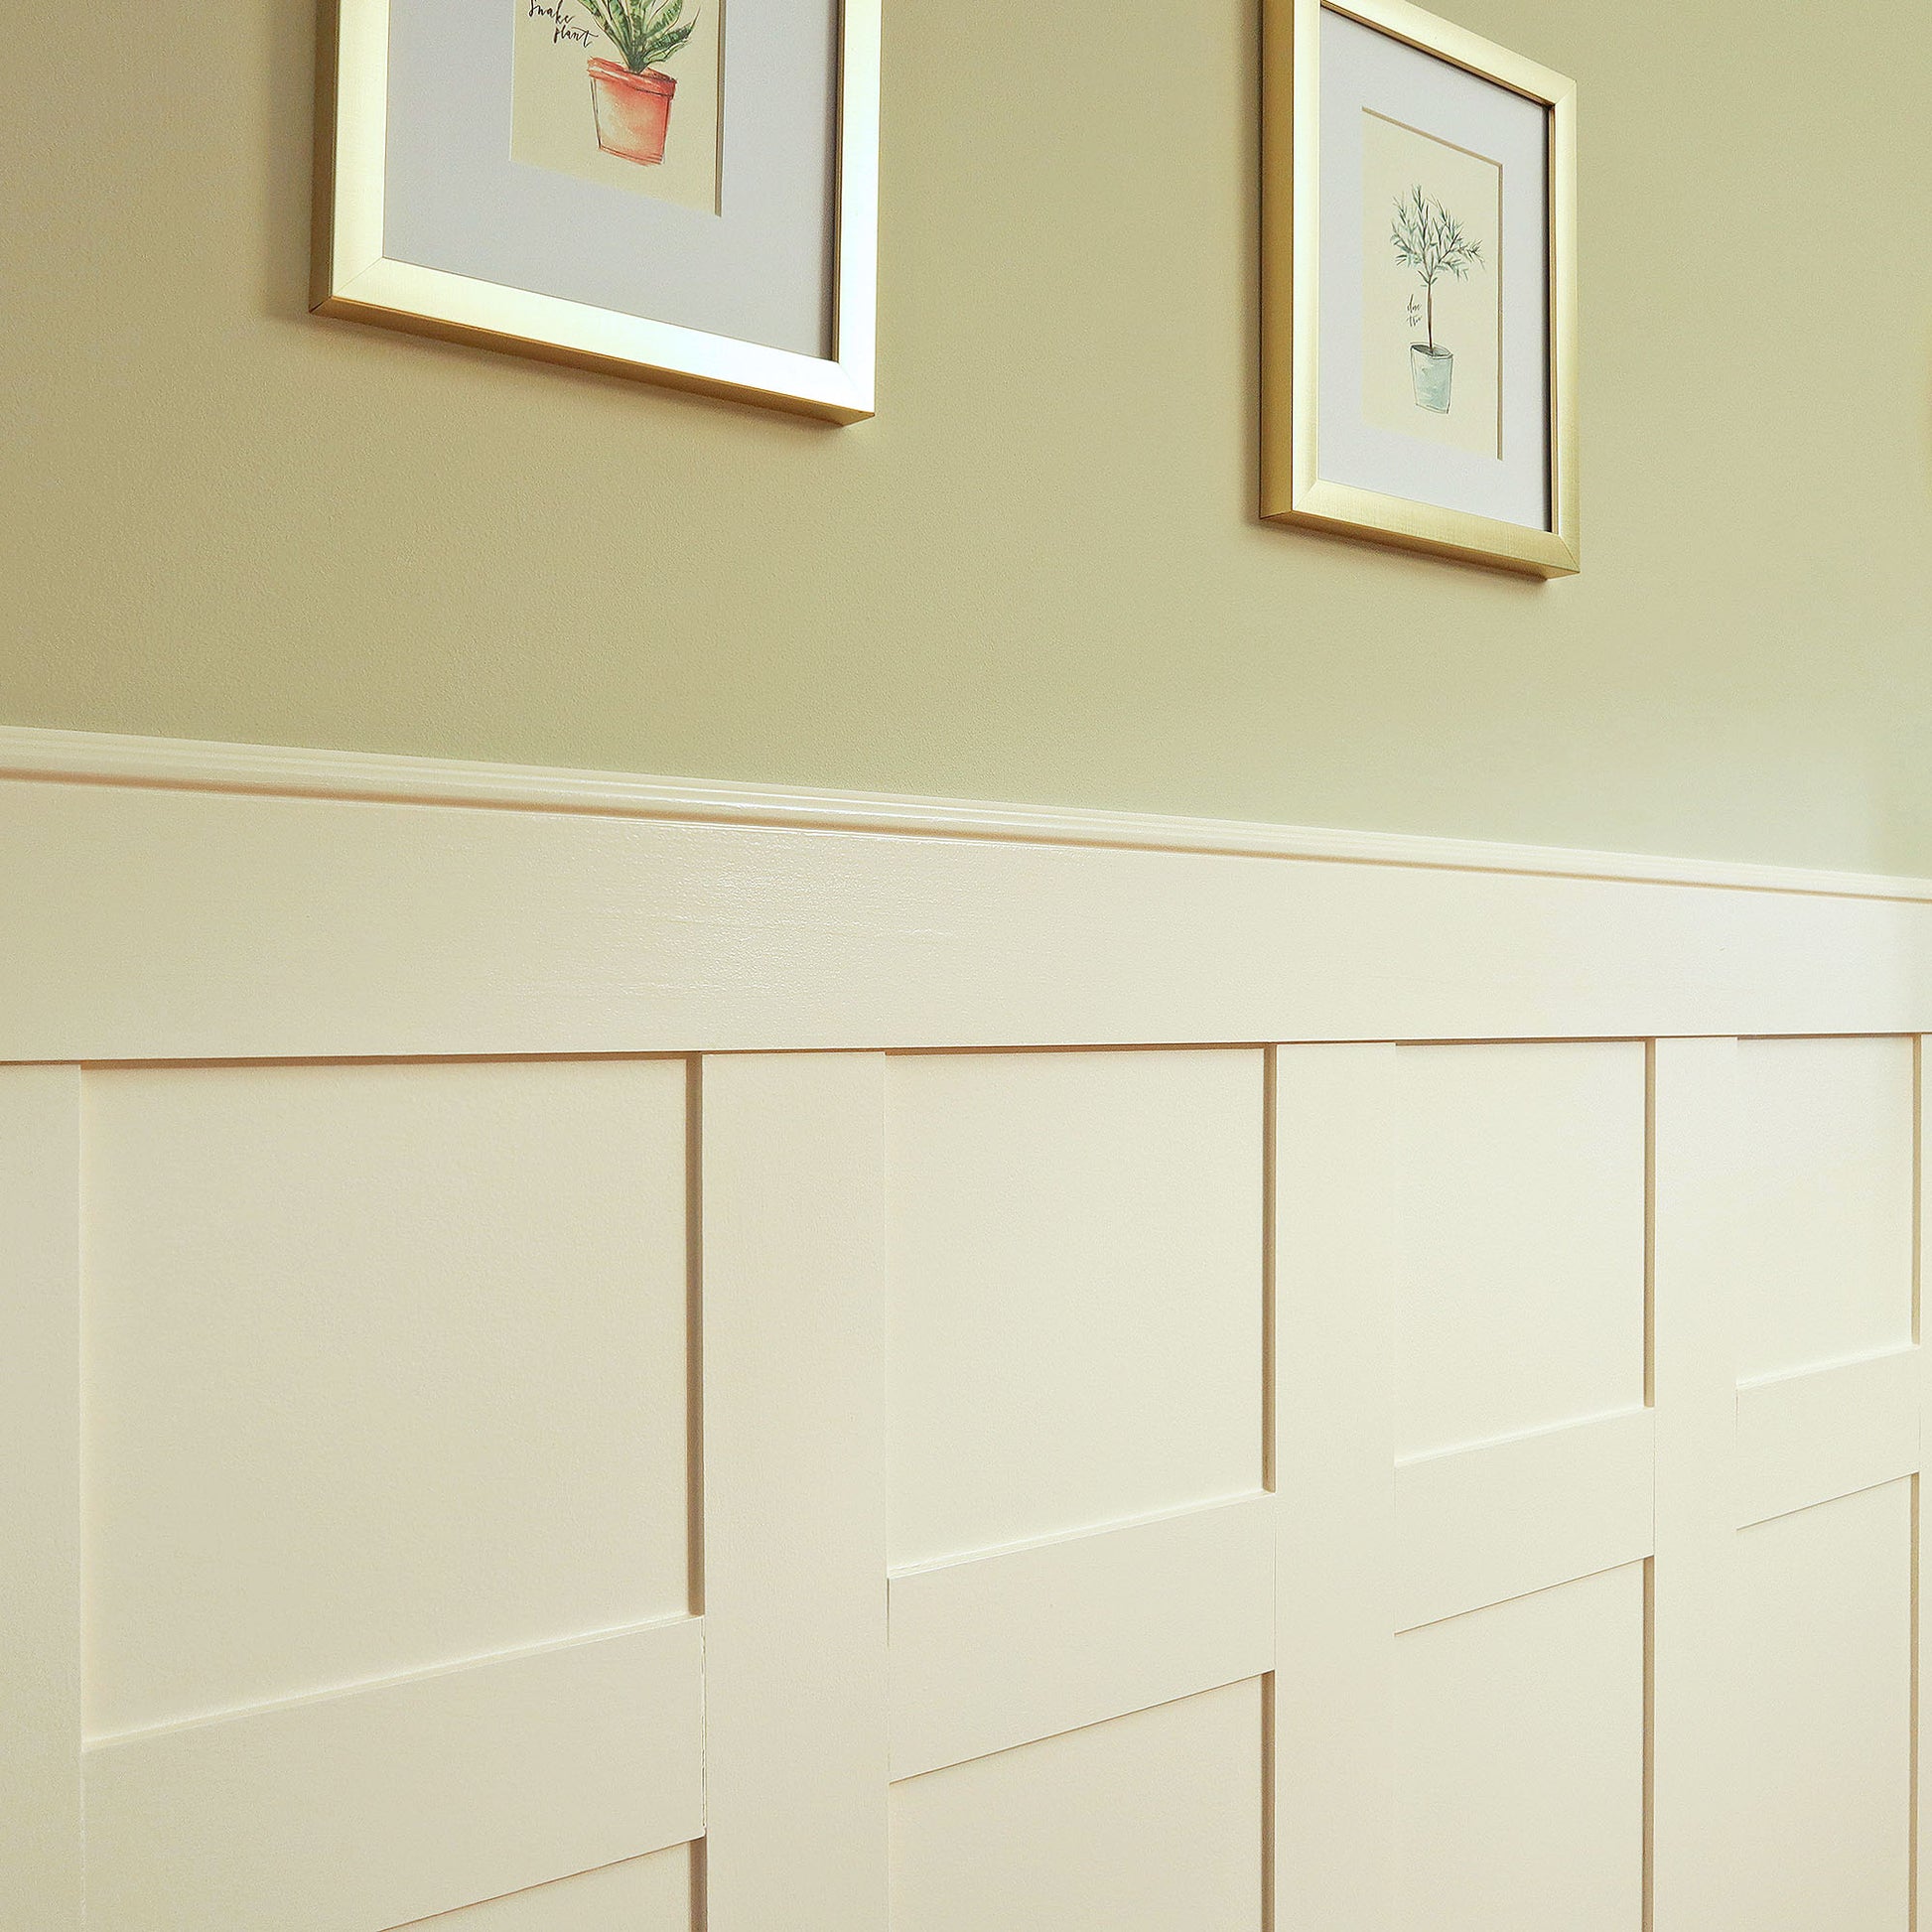 Board and Batten Wainscoting